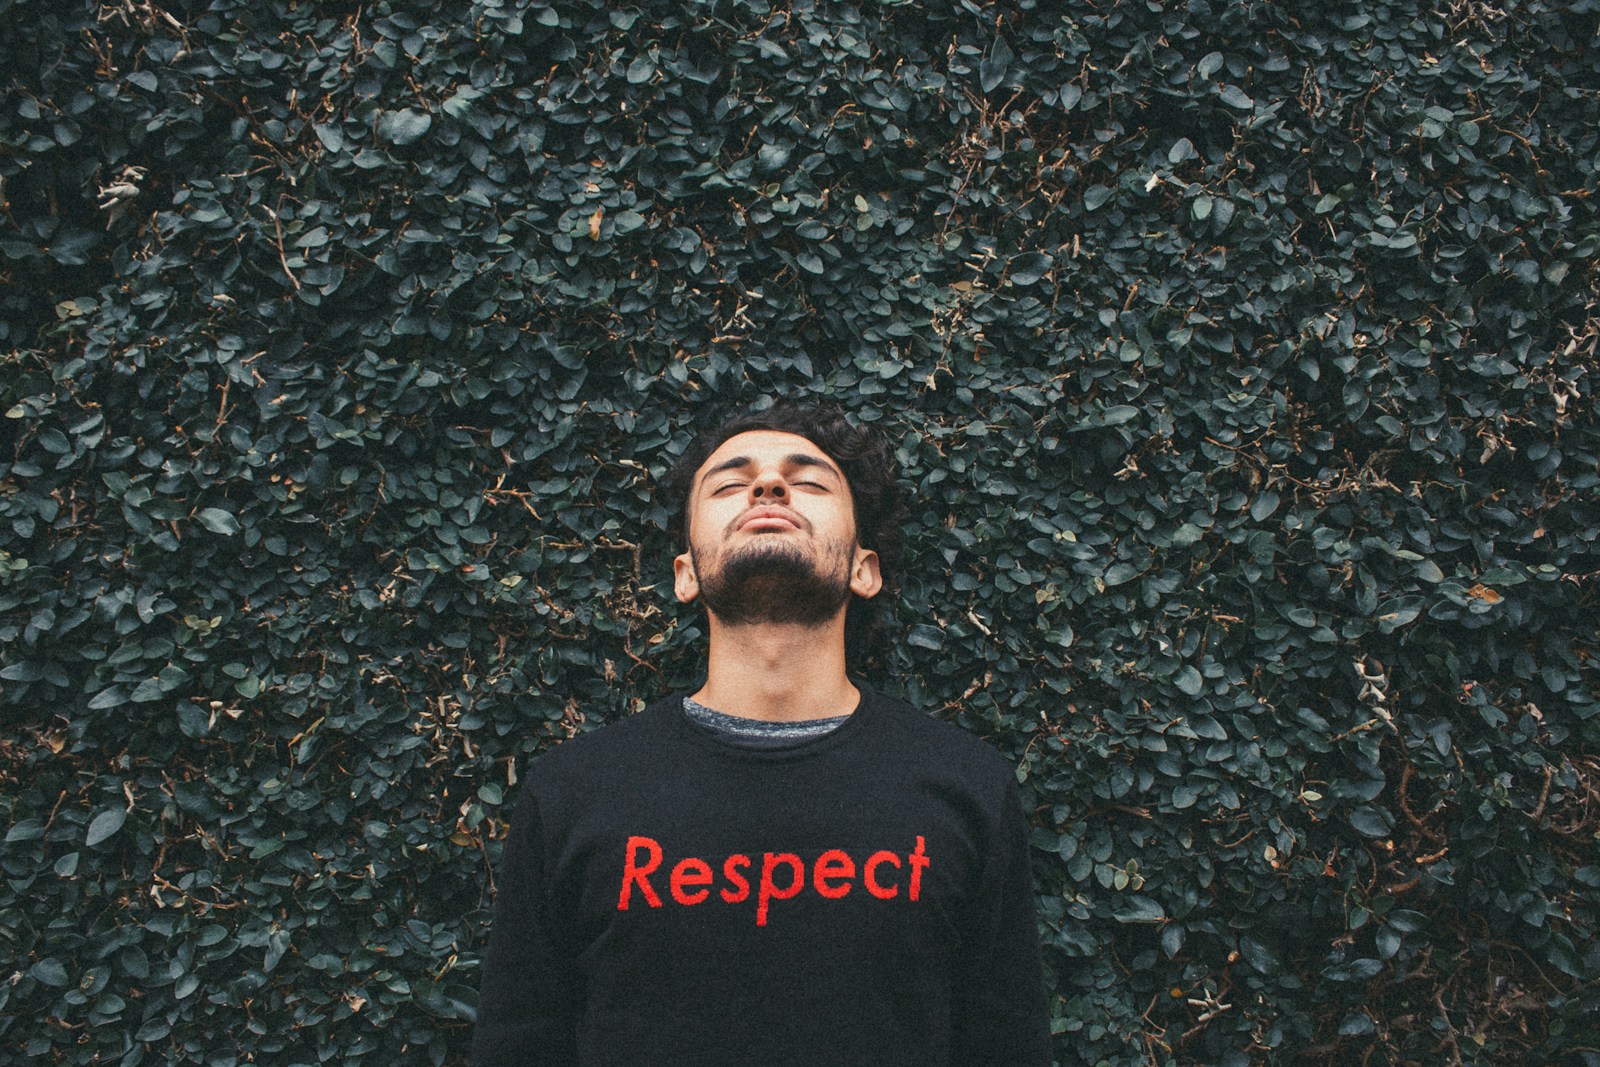 How to Make People Respect You in Seconds: Claim Your Worth